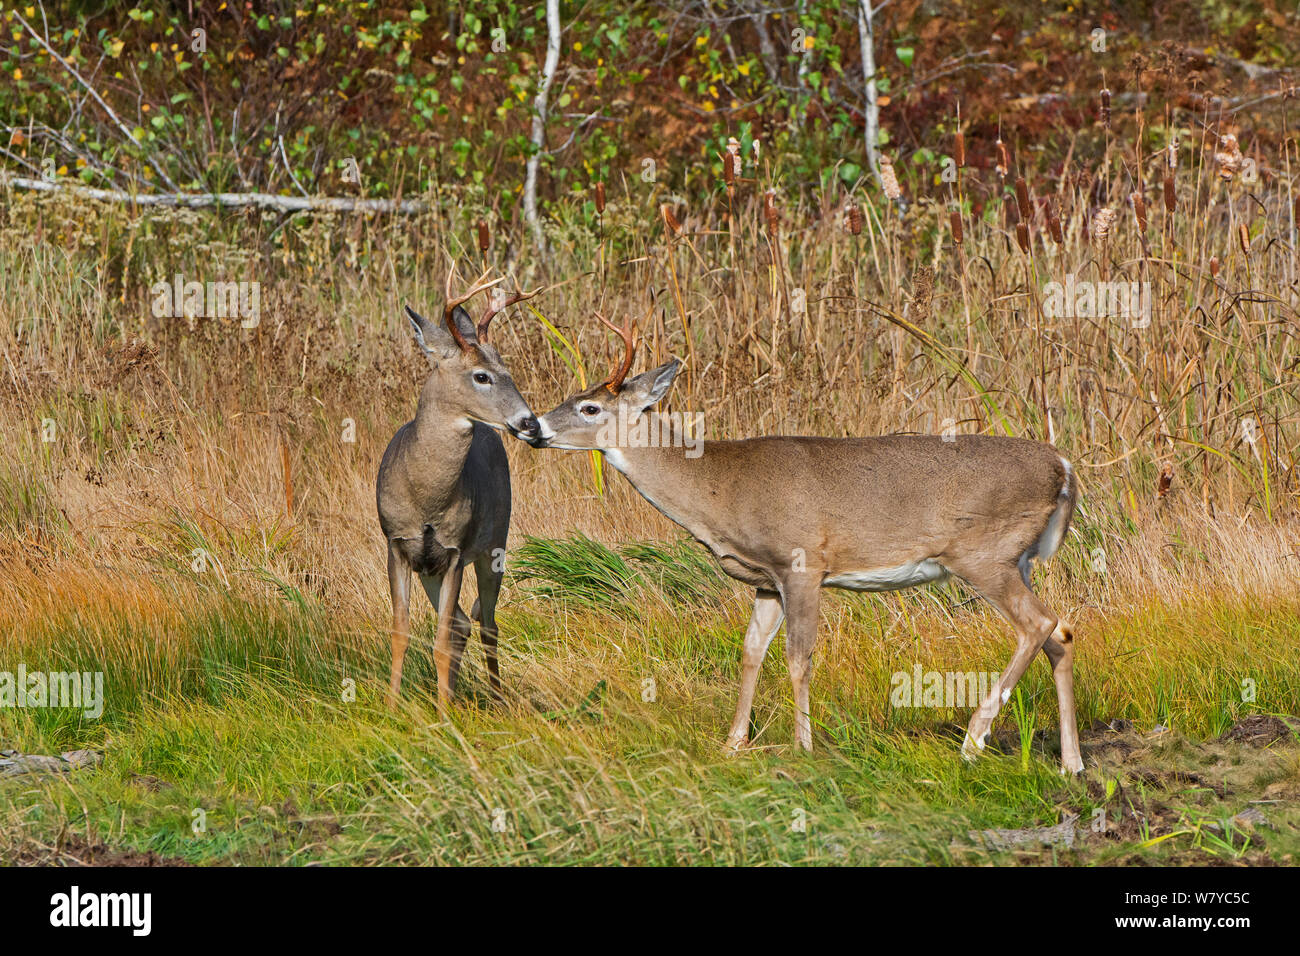 White-tailed Deer (Odocoileus virginianus) two males durin rut, Acadia National Park, Maine, USA, October. Stock Photo